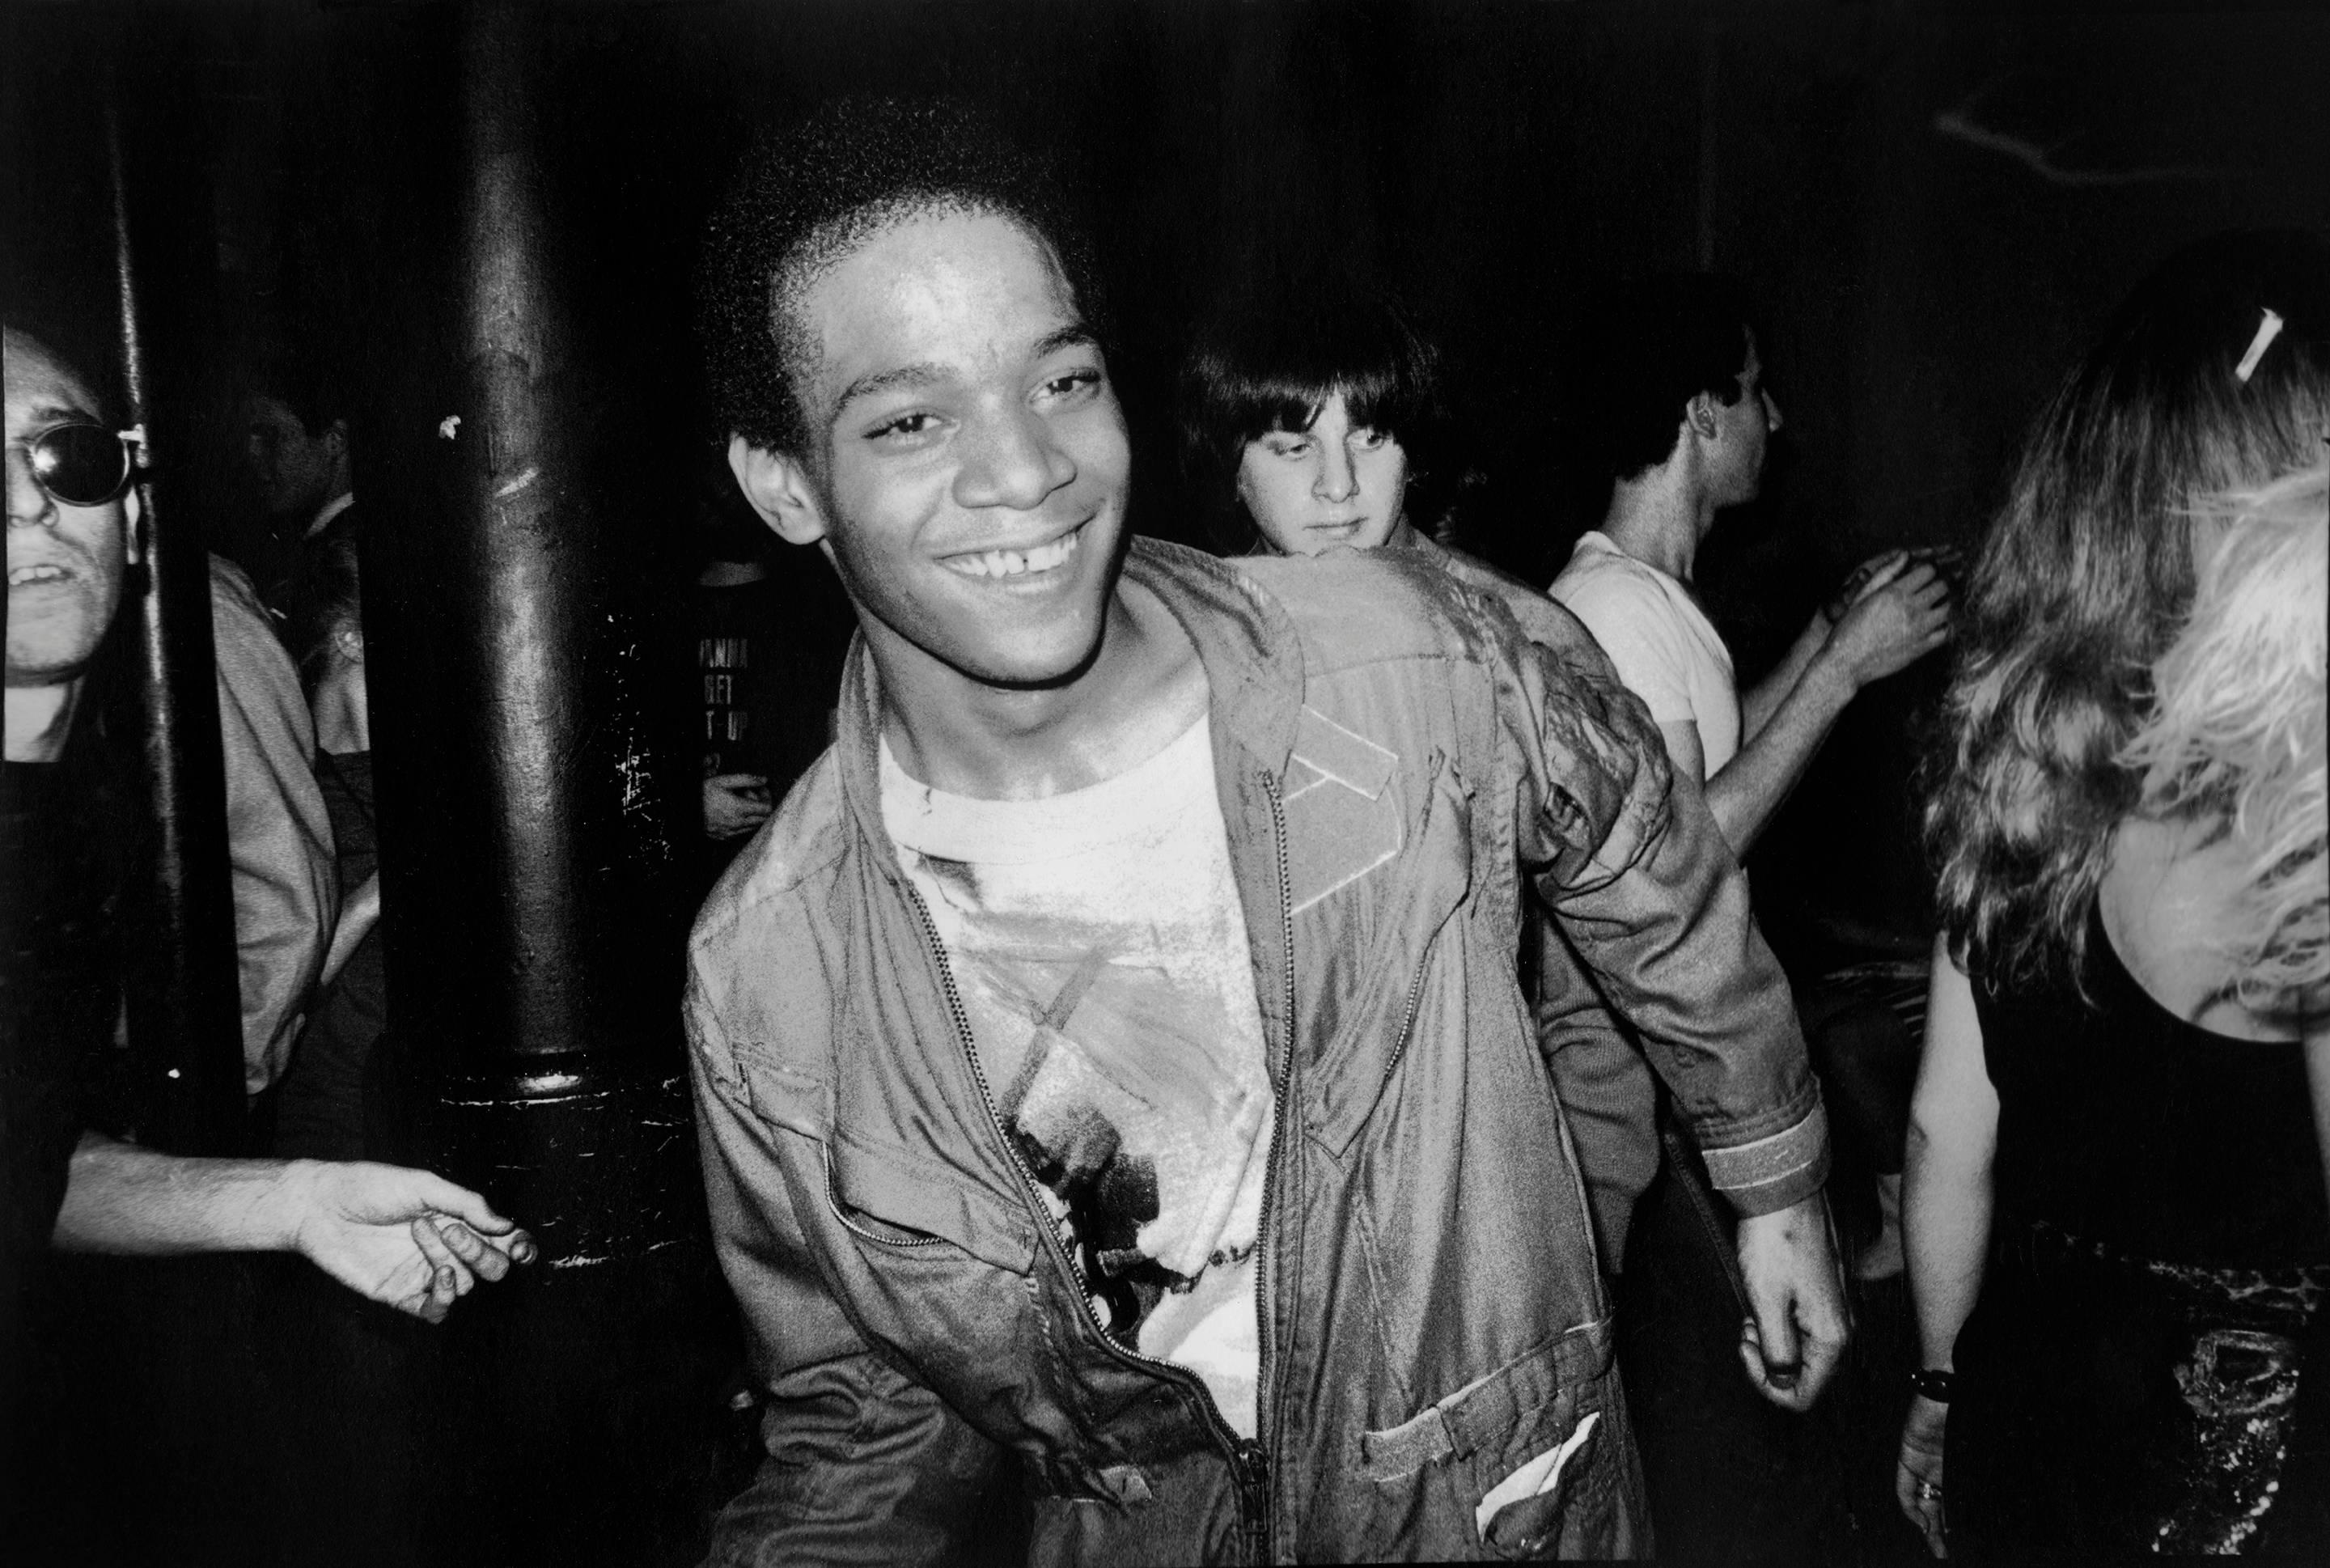 BASQUIAT Dancing at The Mudd Club, 1979 (Basquiat Boom For Real photograph)